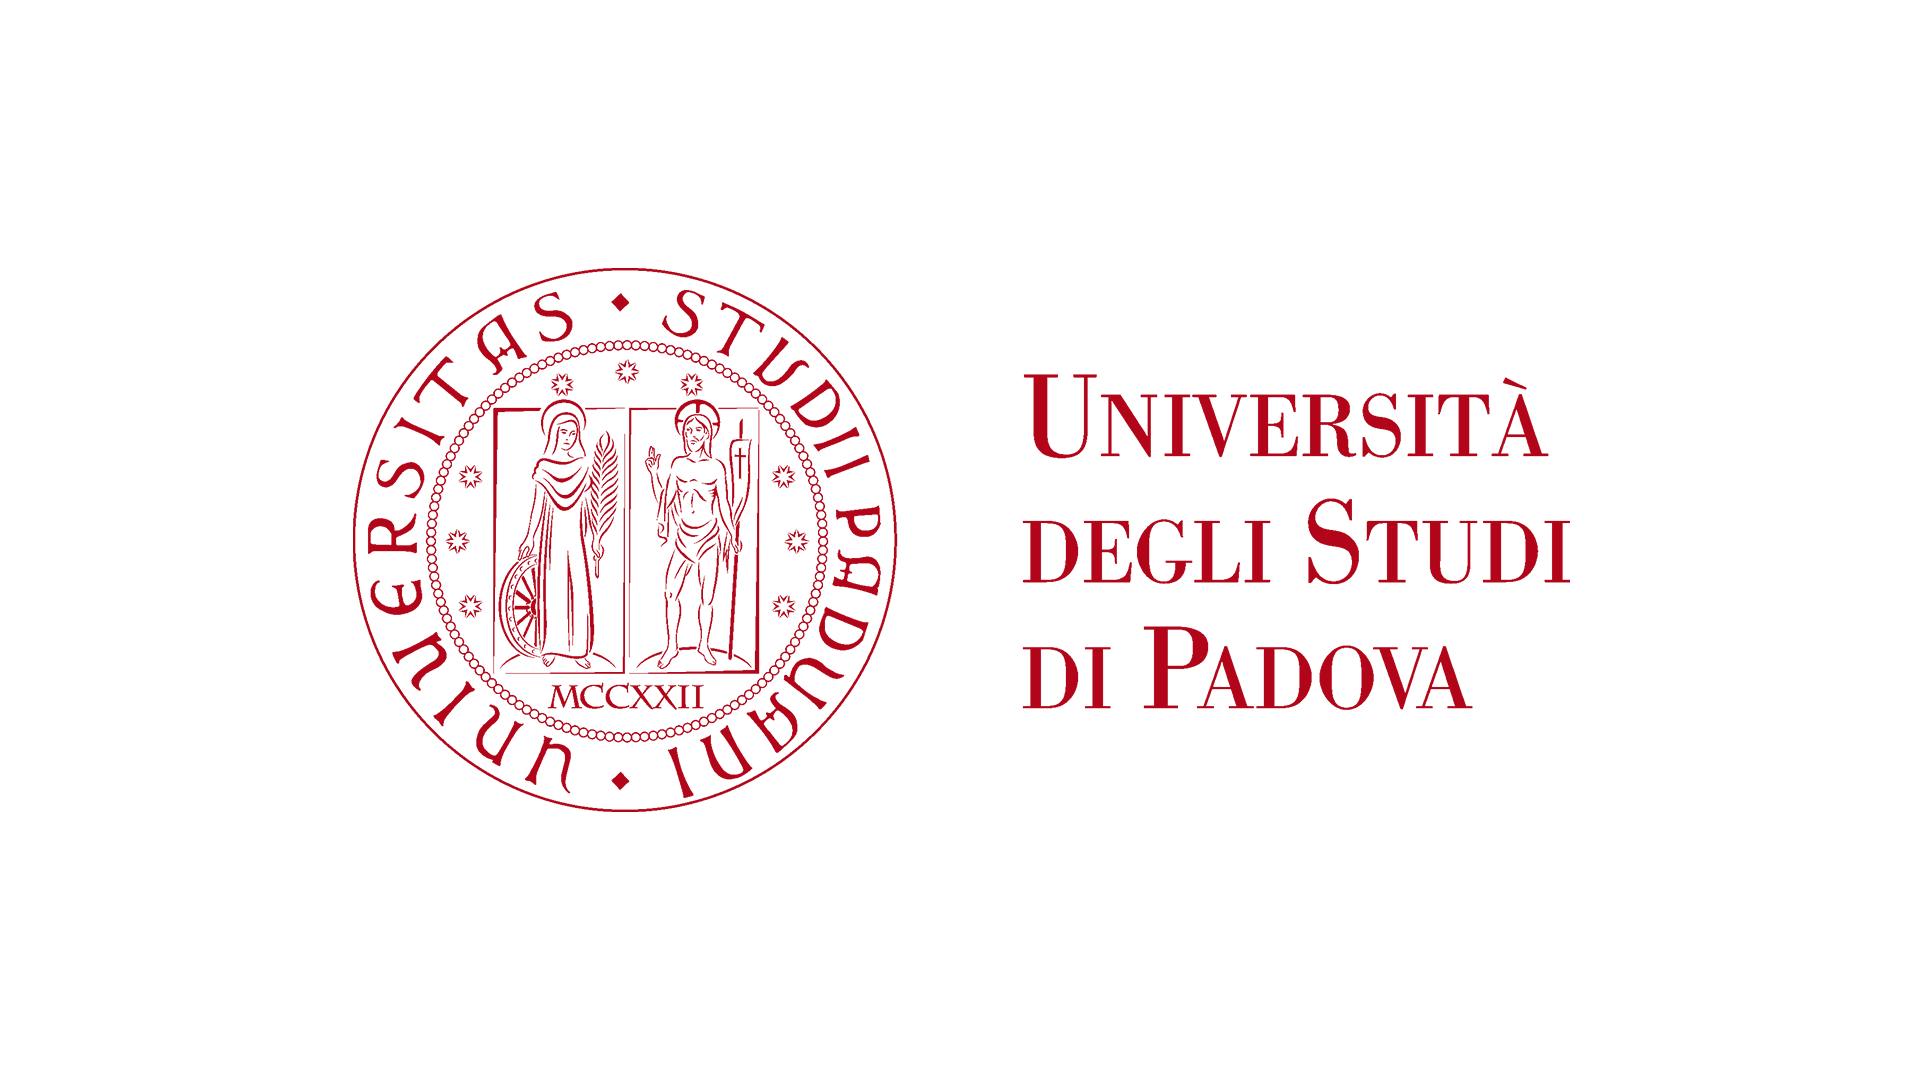 Red logo of the University of Padua on a white background.